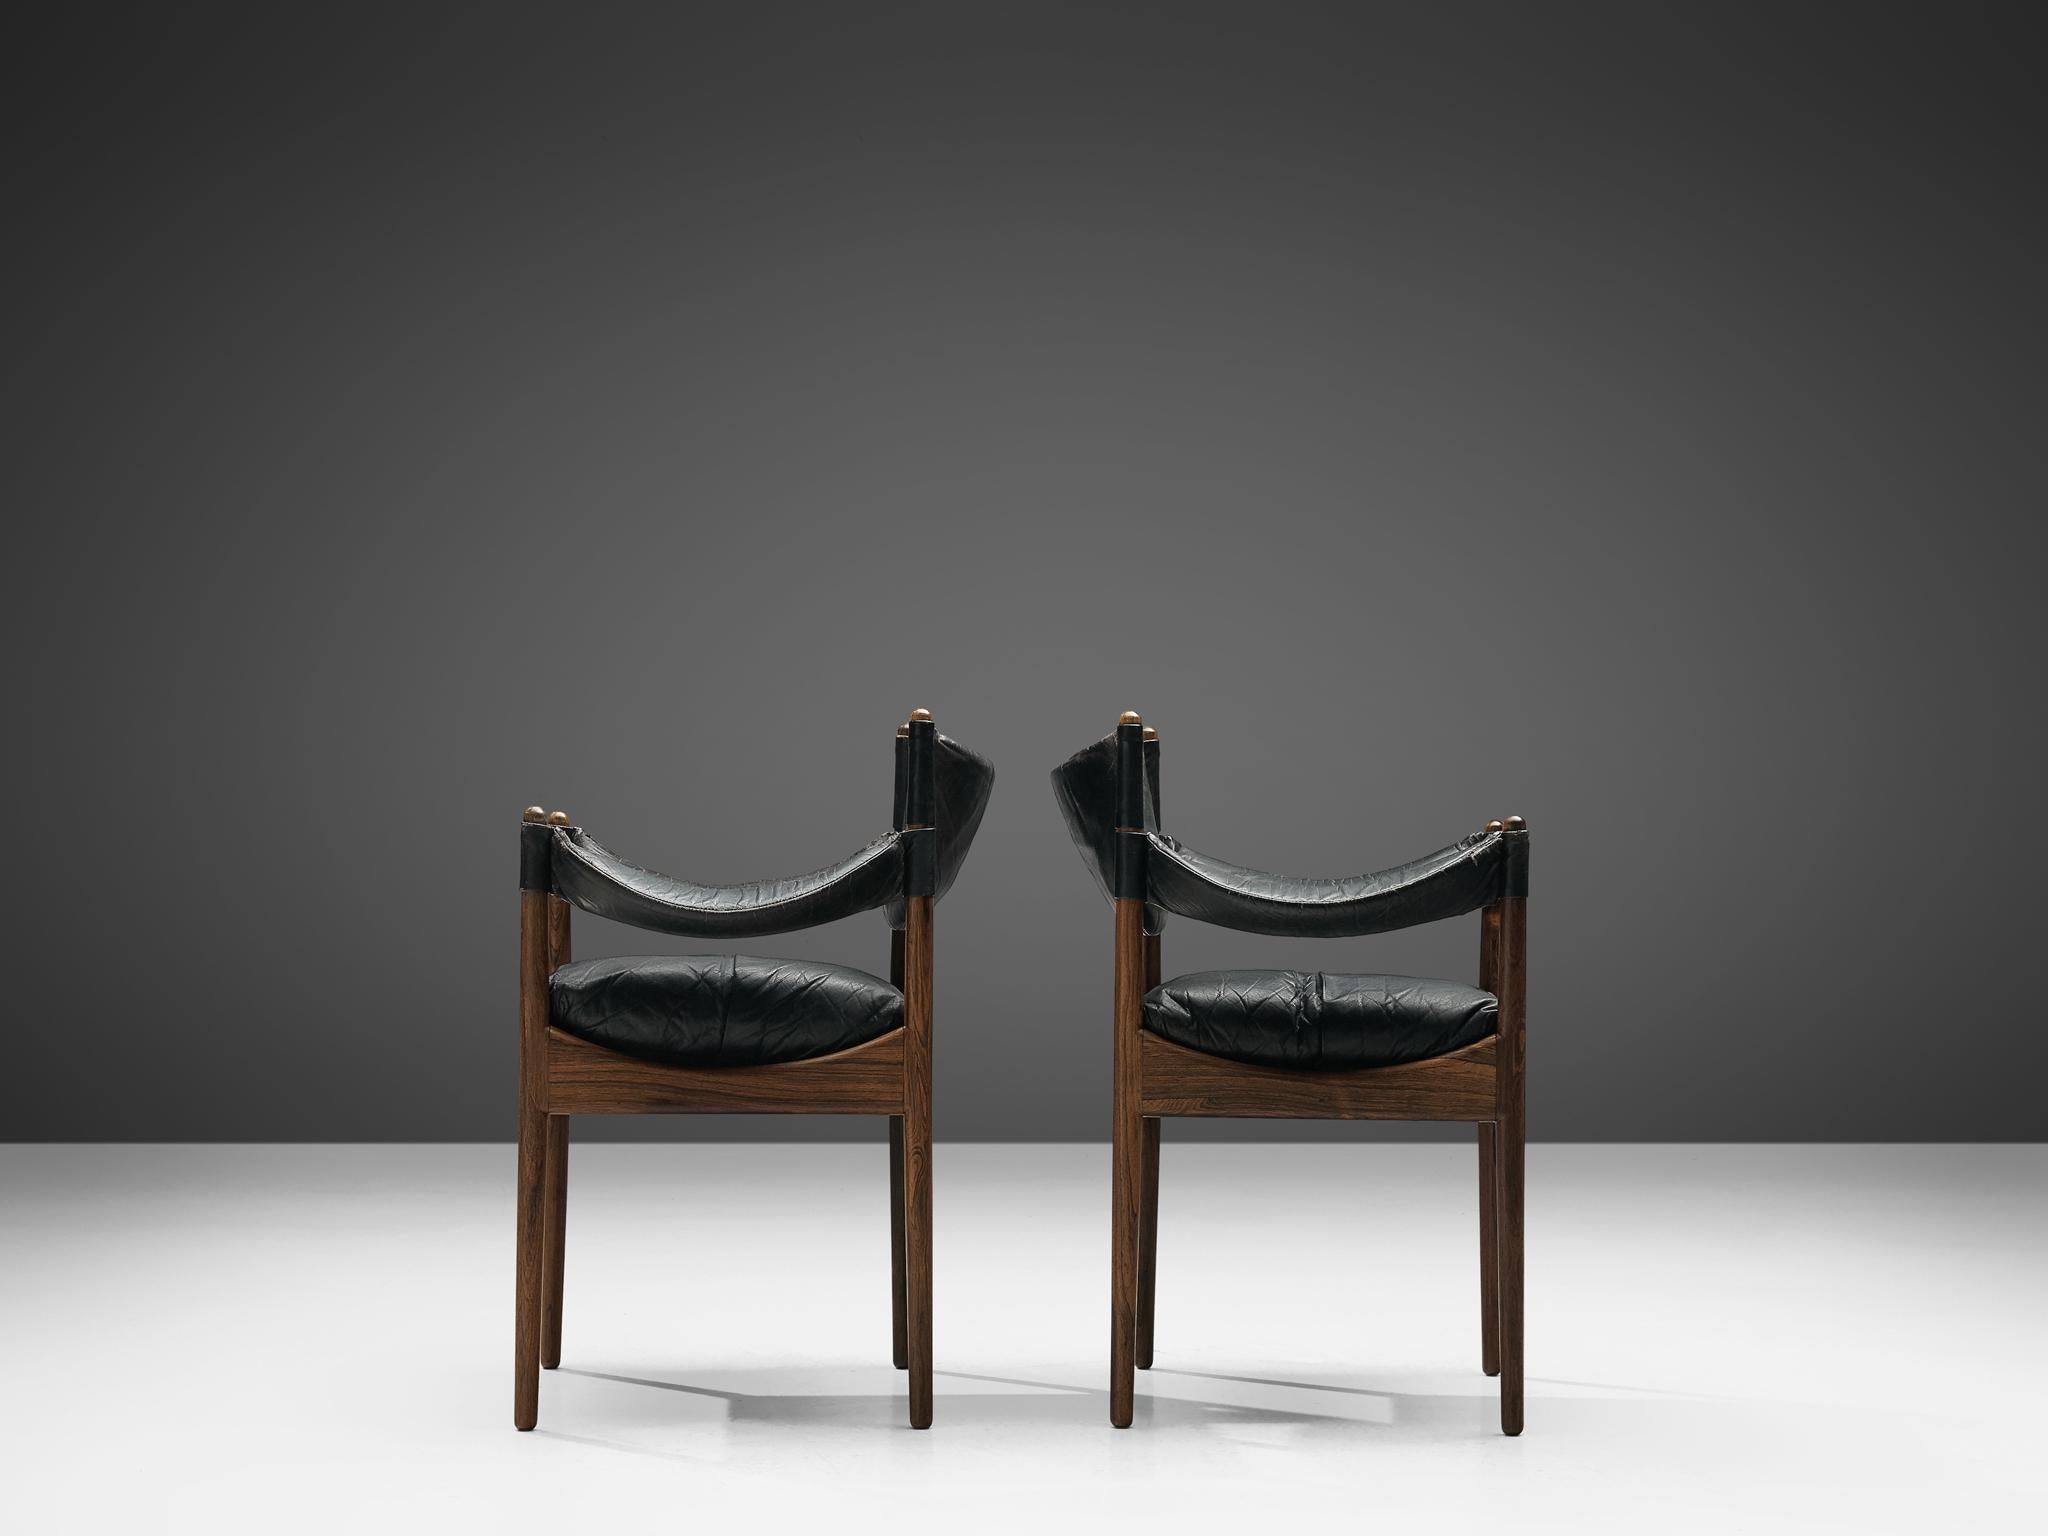 kristian solmer vedel chair